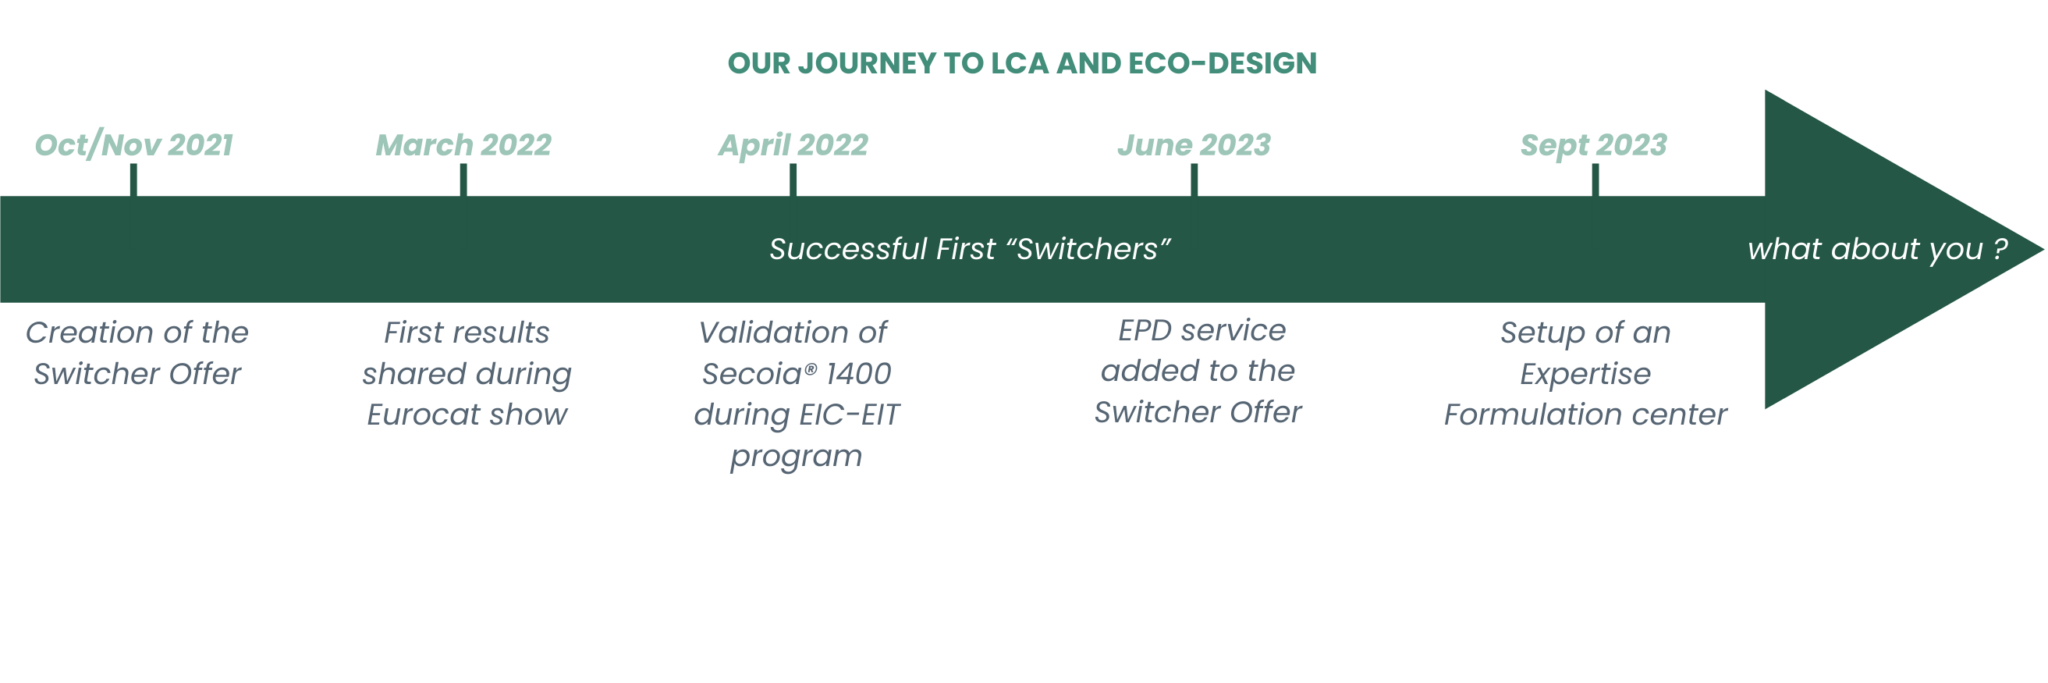 history of the LCA experimentations and success of our switcher offer